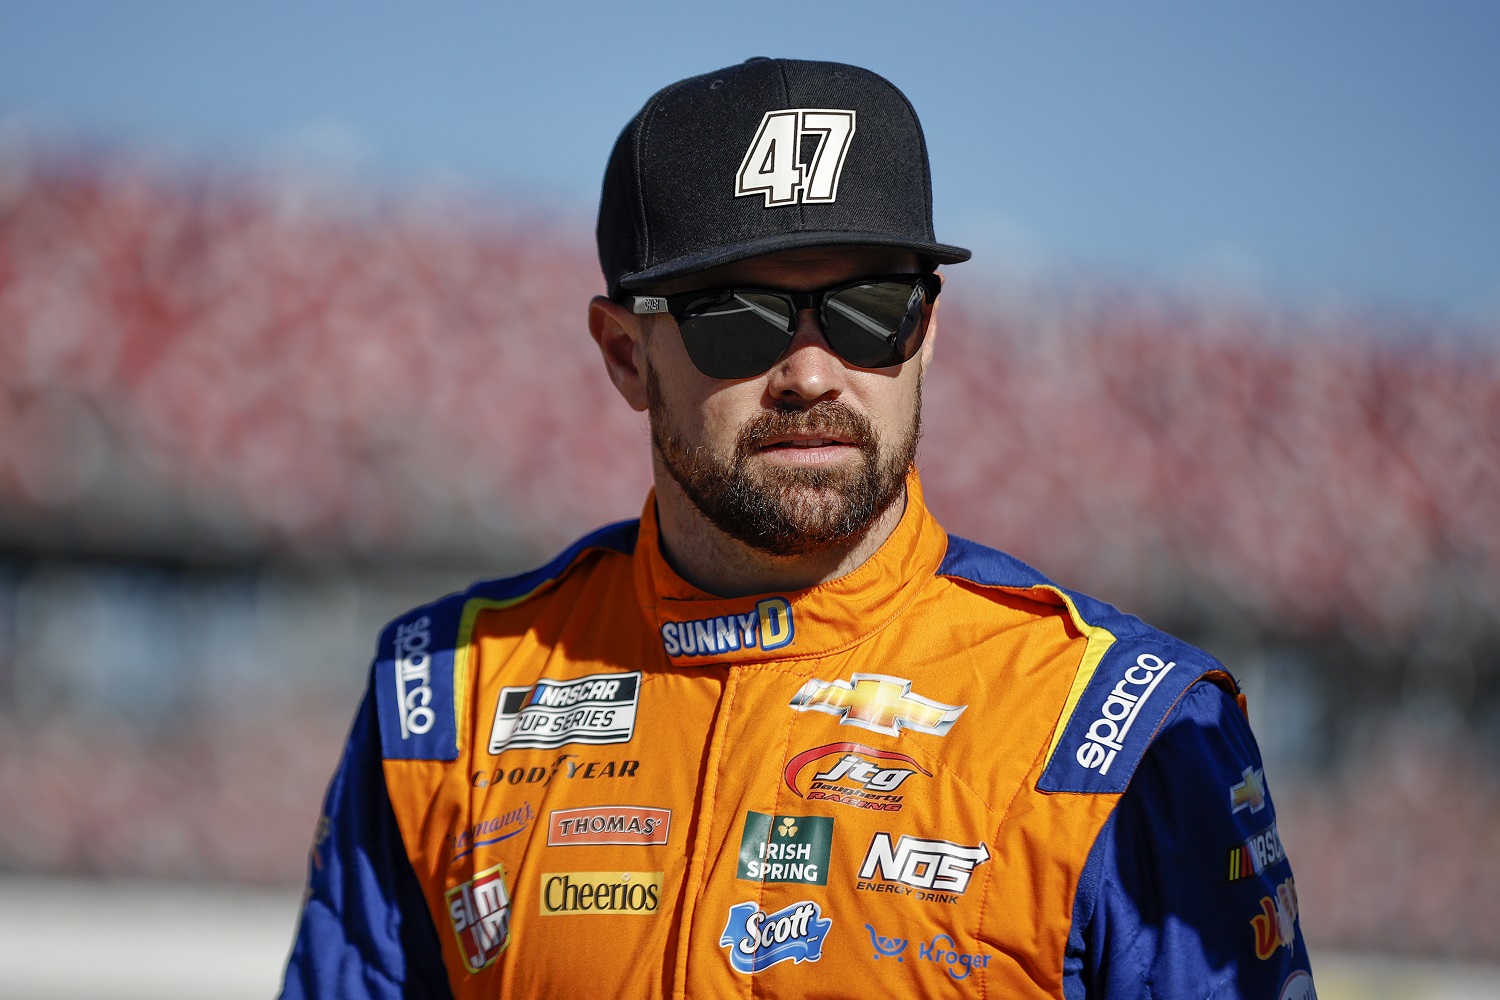 Ricky Stenhouse Jr., driver of the No. 47 Chevrolet, walks the grid during qualifying for the NASCAR Cup Series YellaWood 500 at Talladega Superspeedway on Oct. 1, 2022. | Sean Gardner/Getty Images